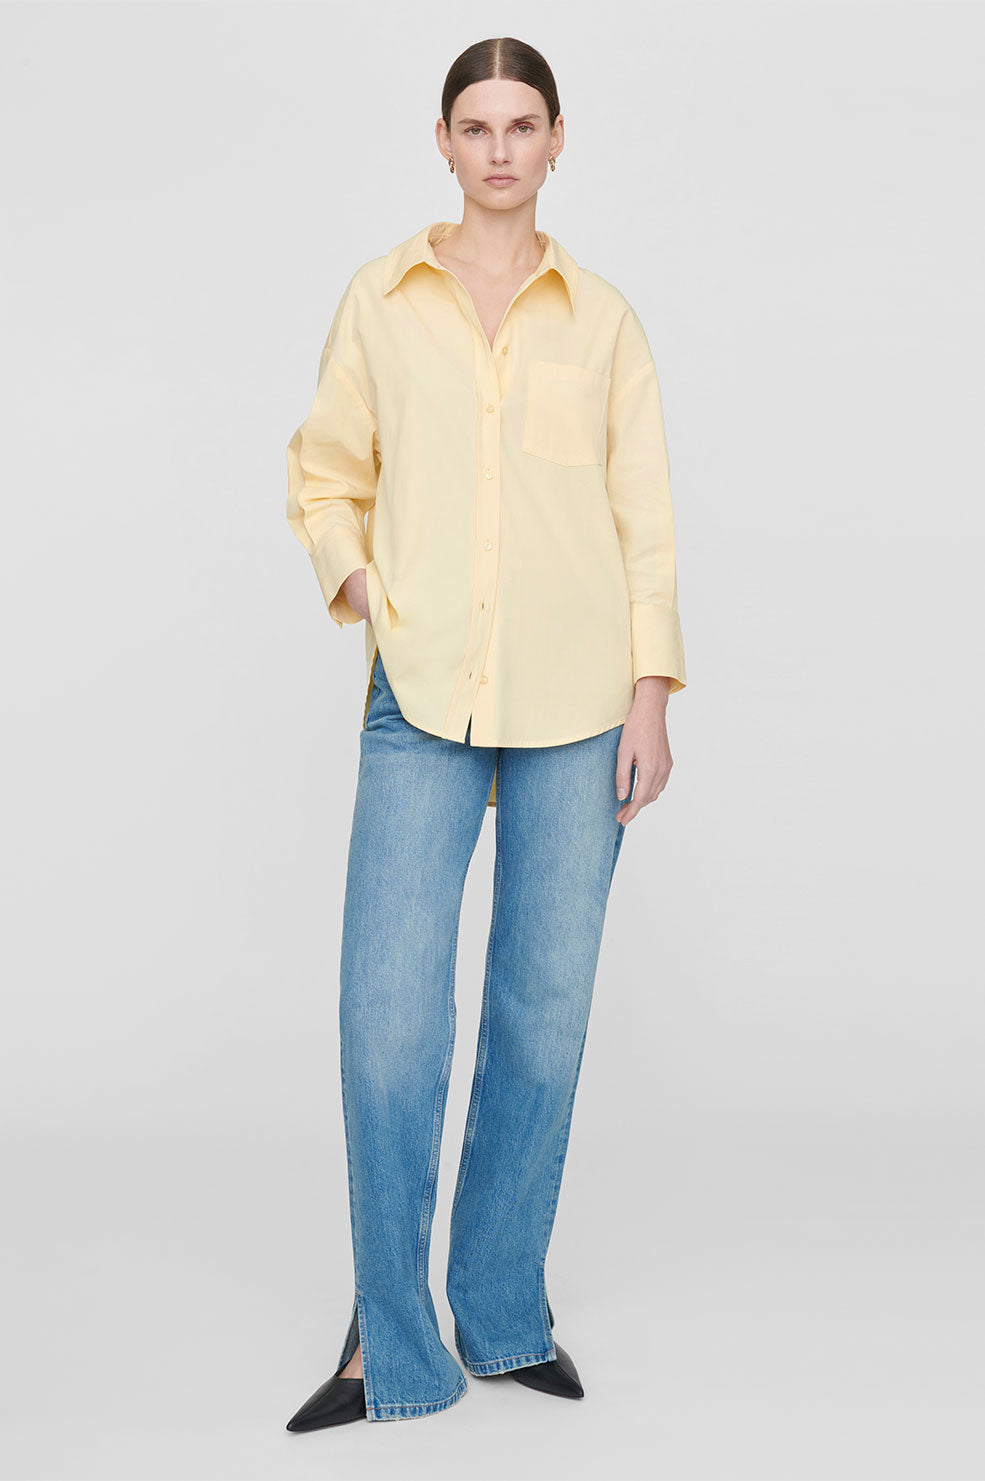 Anine Bing Mika Shirt in Yellow available at TNT The New Trend Australia.